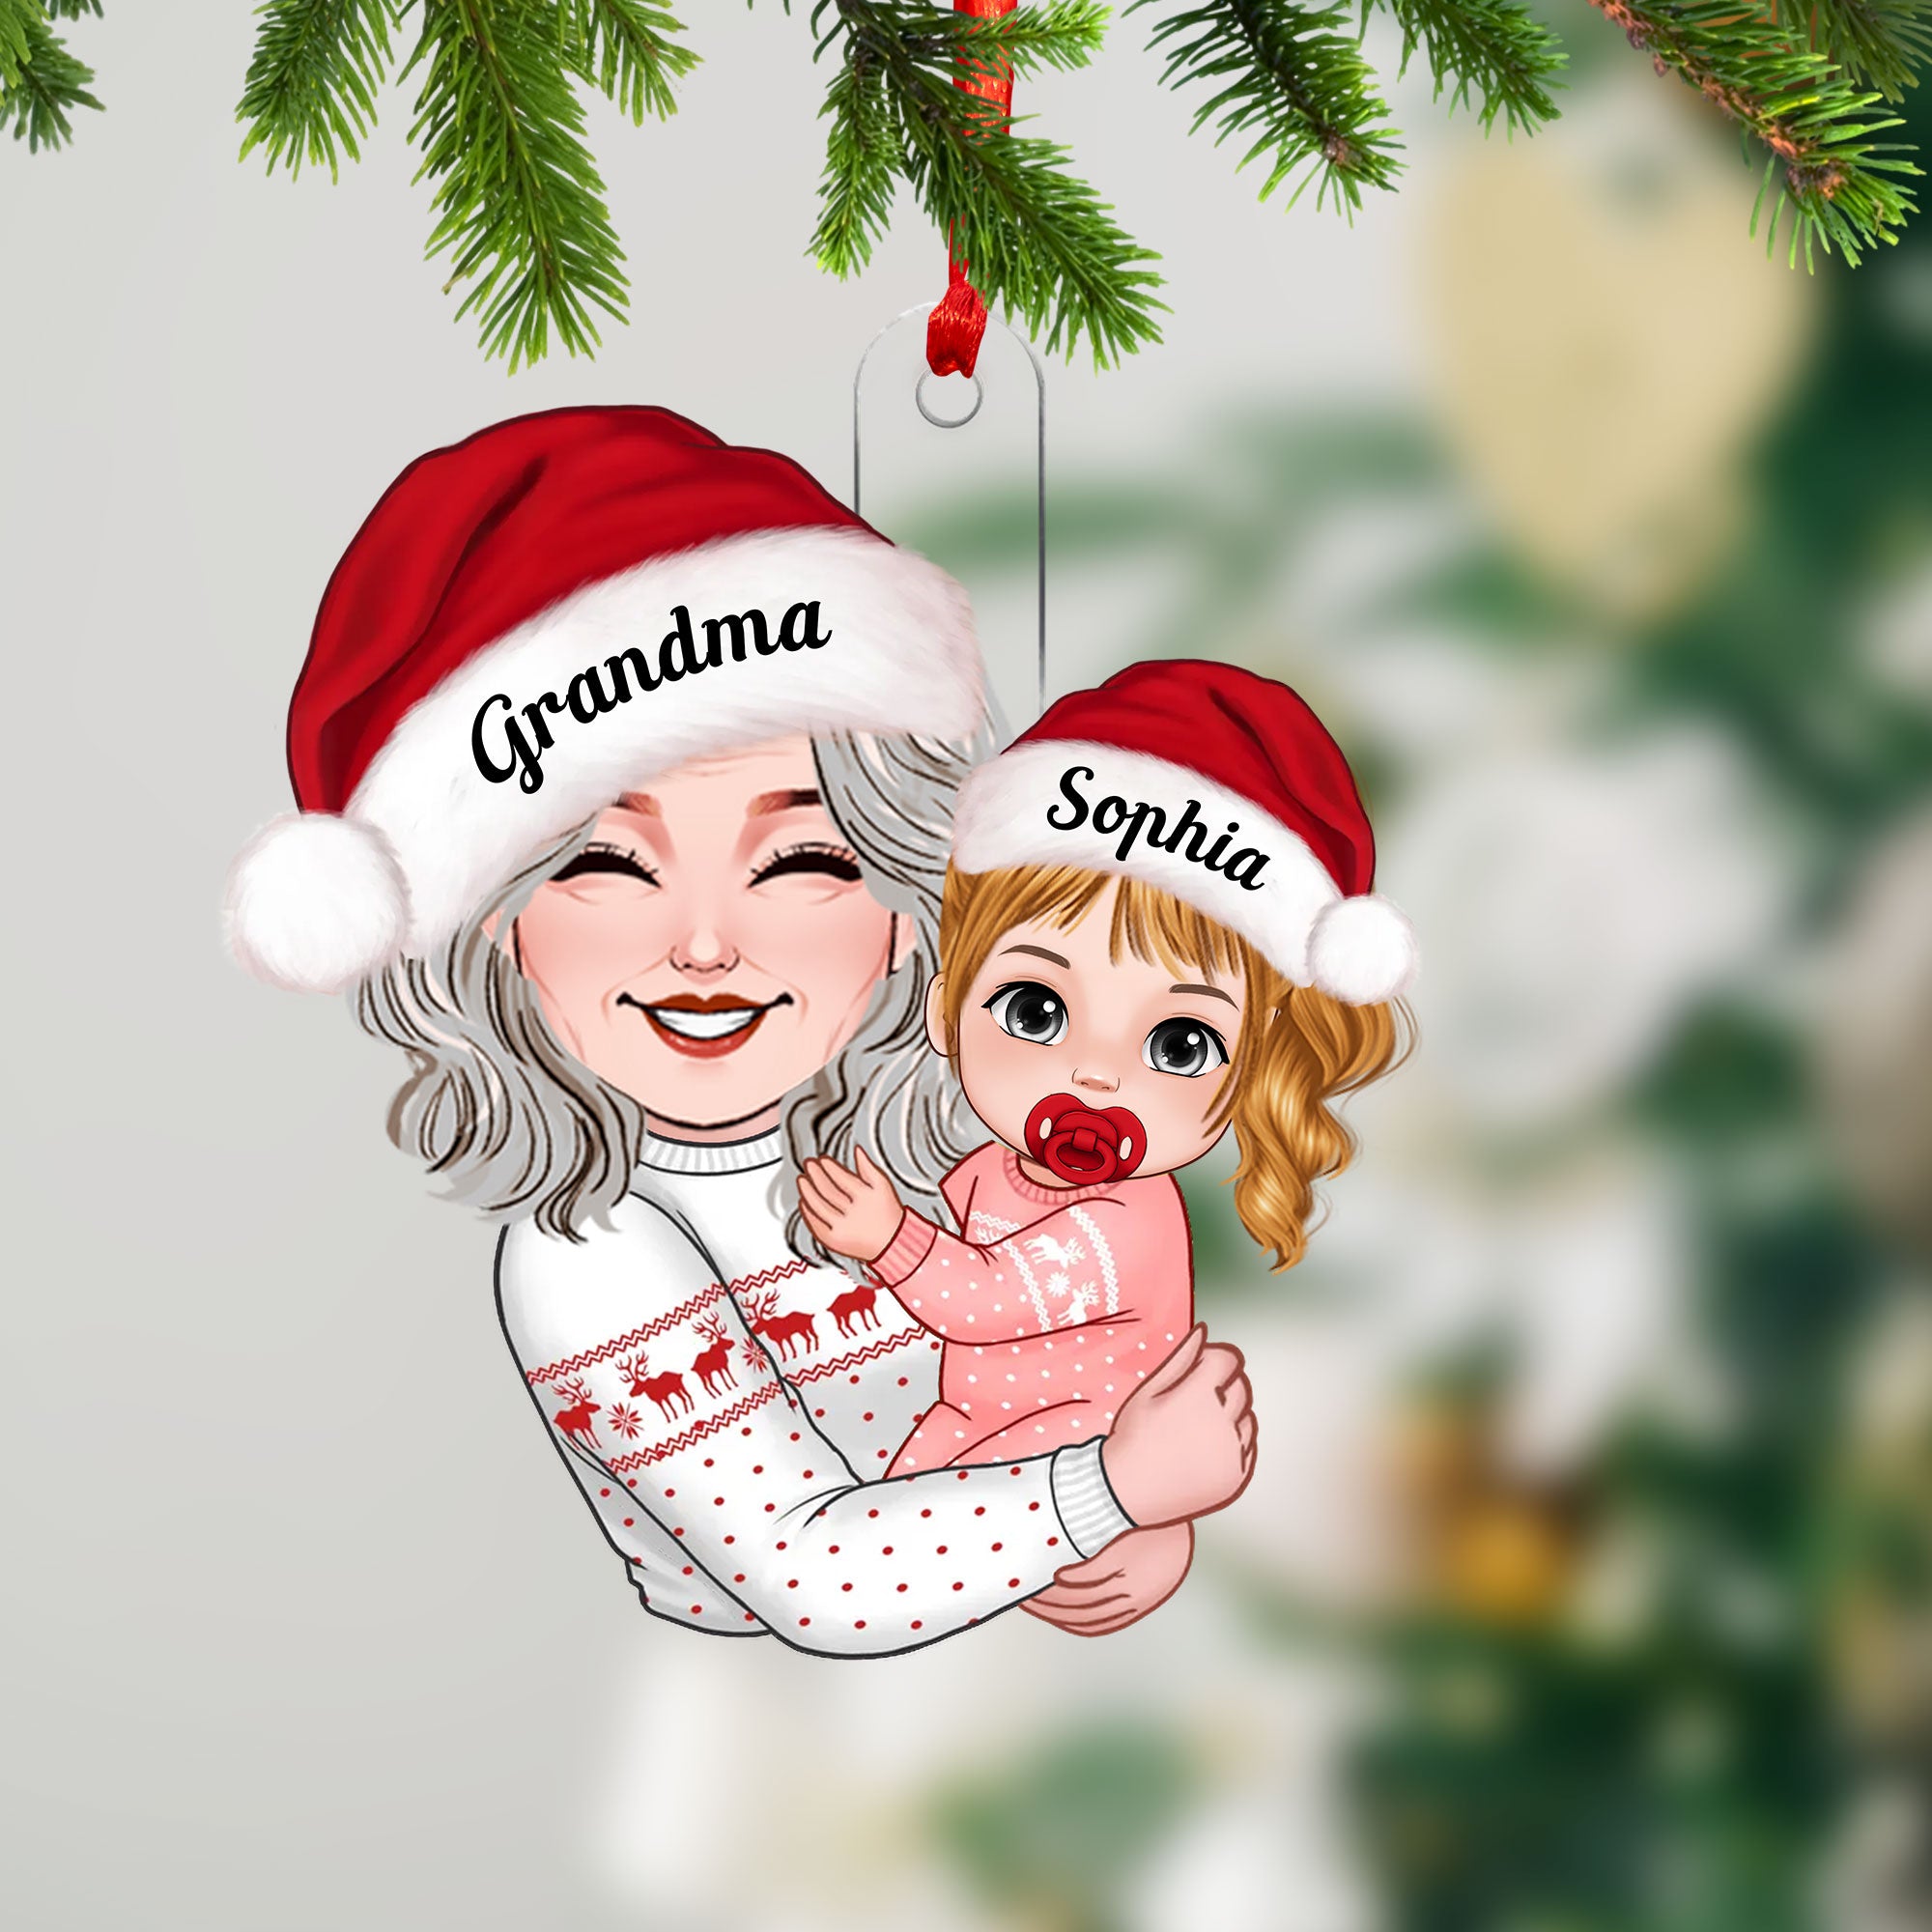 Grandma Carried The Kid, Christmas Decor - Personalized Acrylic Ornament - Gift For Family